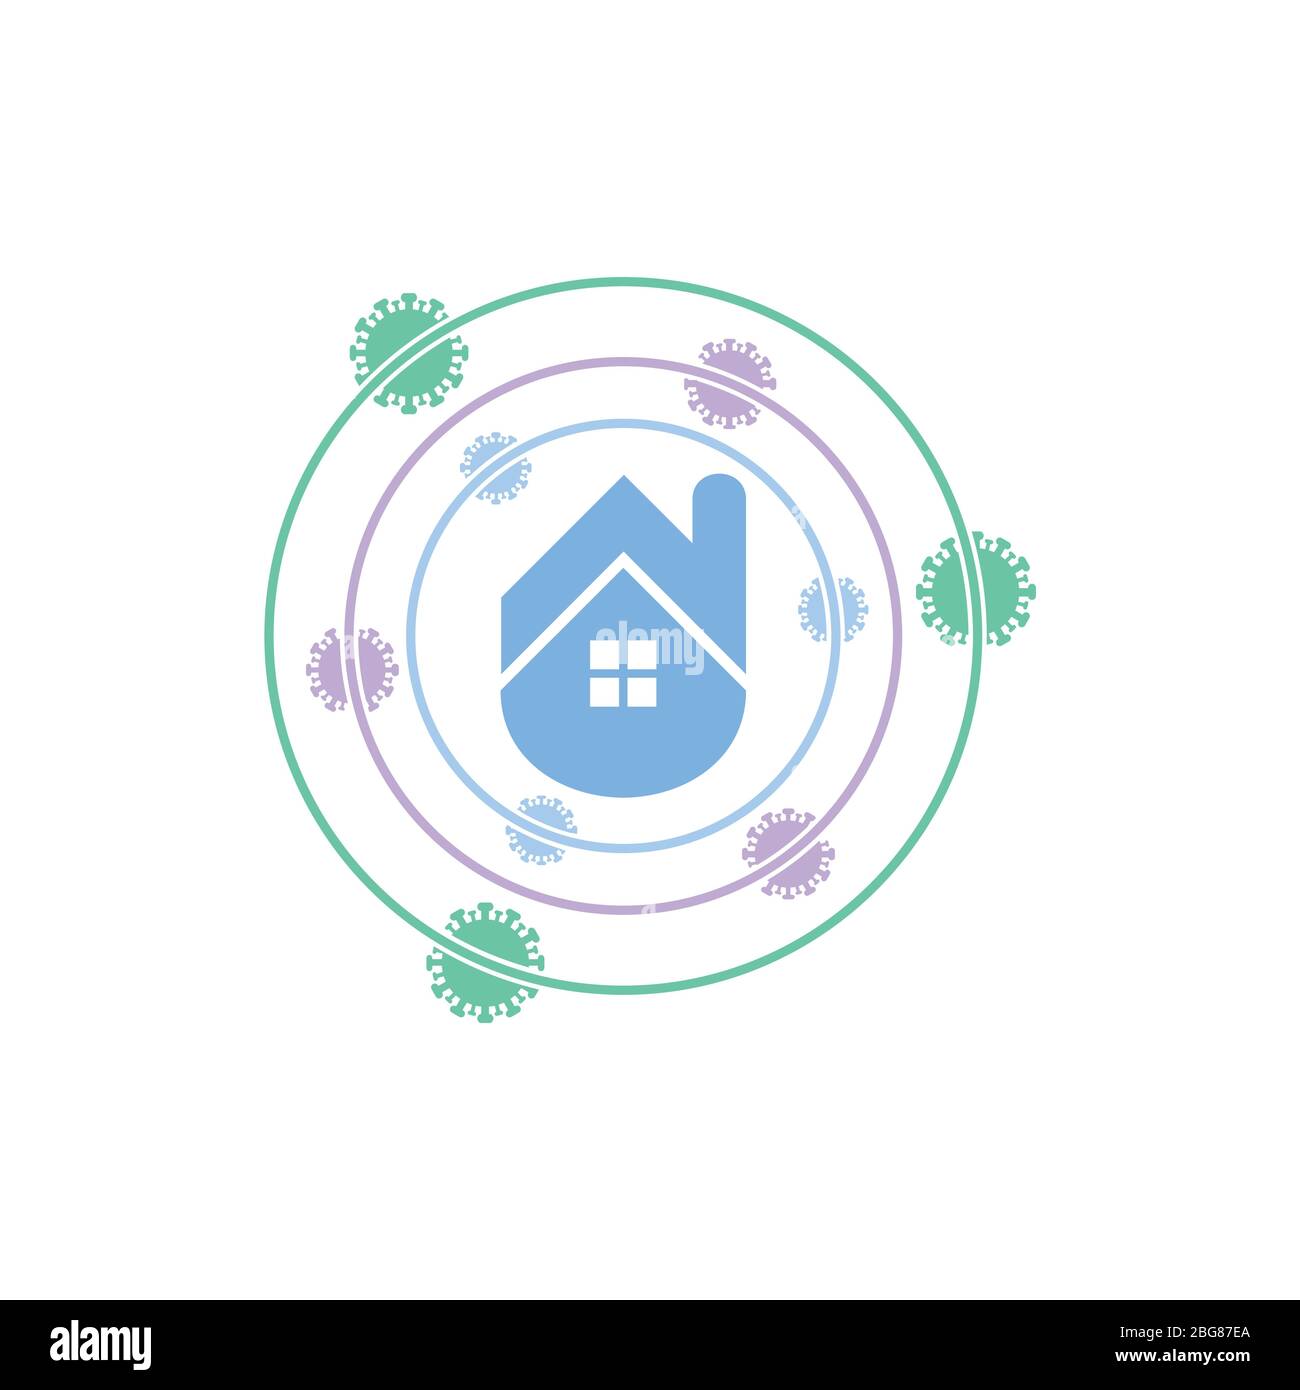 Stay Home Vector Illustrations, Stay At Home Virus Danger Outside the Home, Icon, Sign, Symbol, on white background. Stock Vector